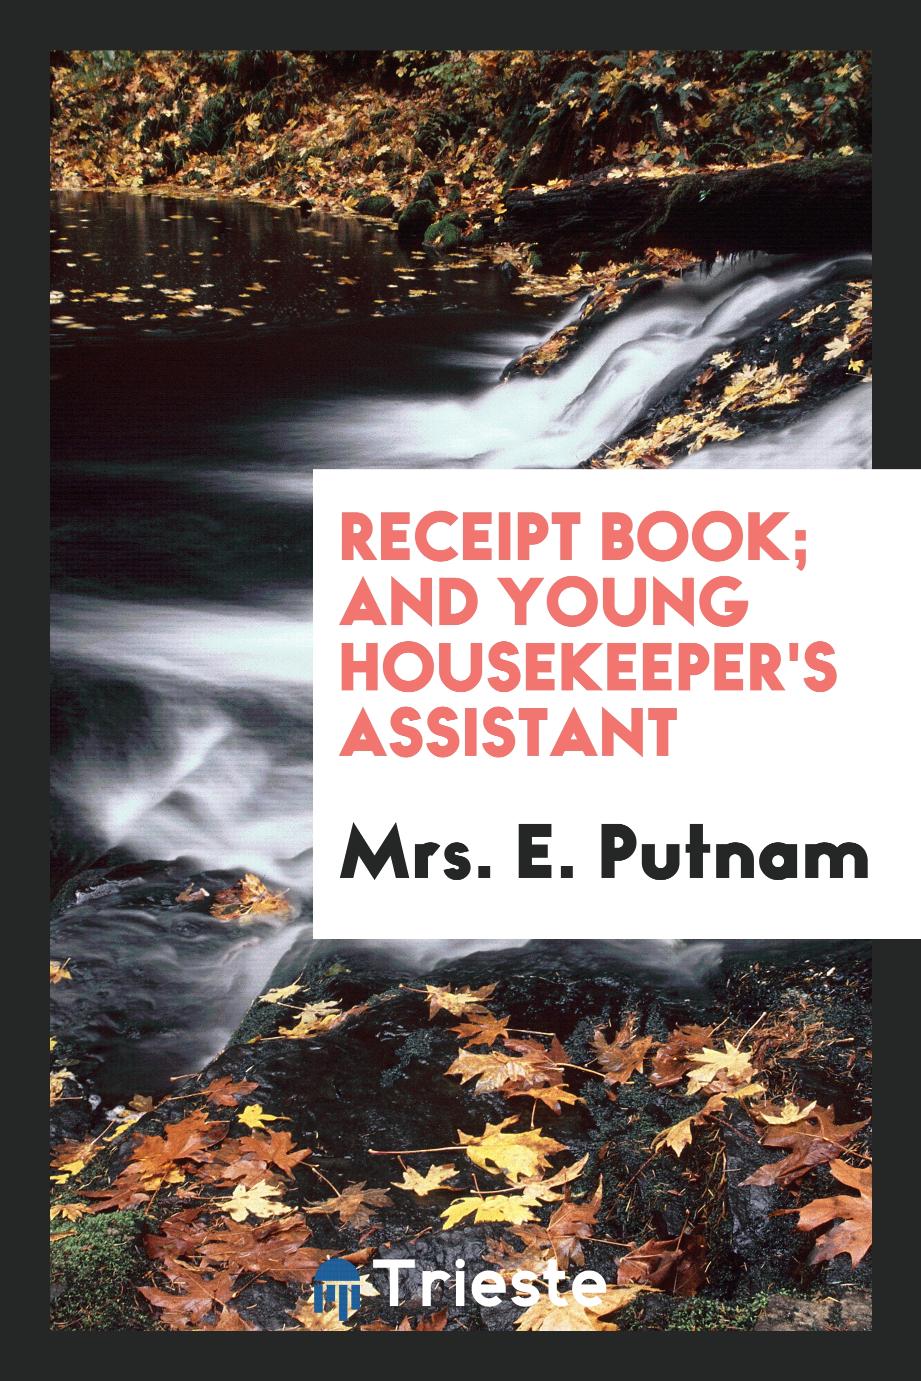 Receipt Book; And Young Housekeeper's Assistant